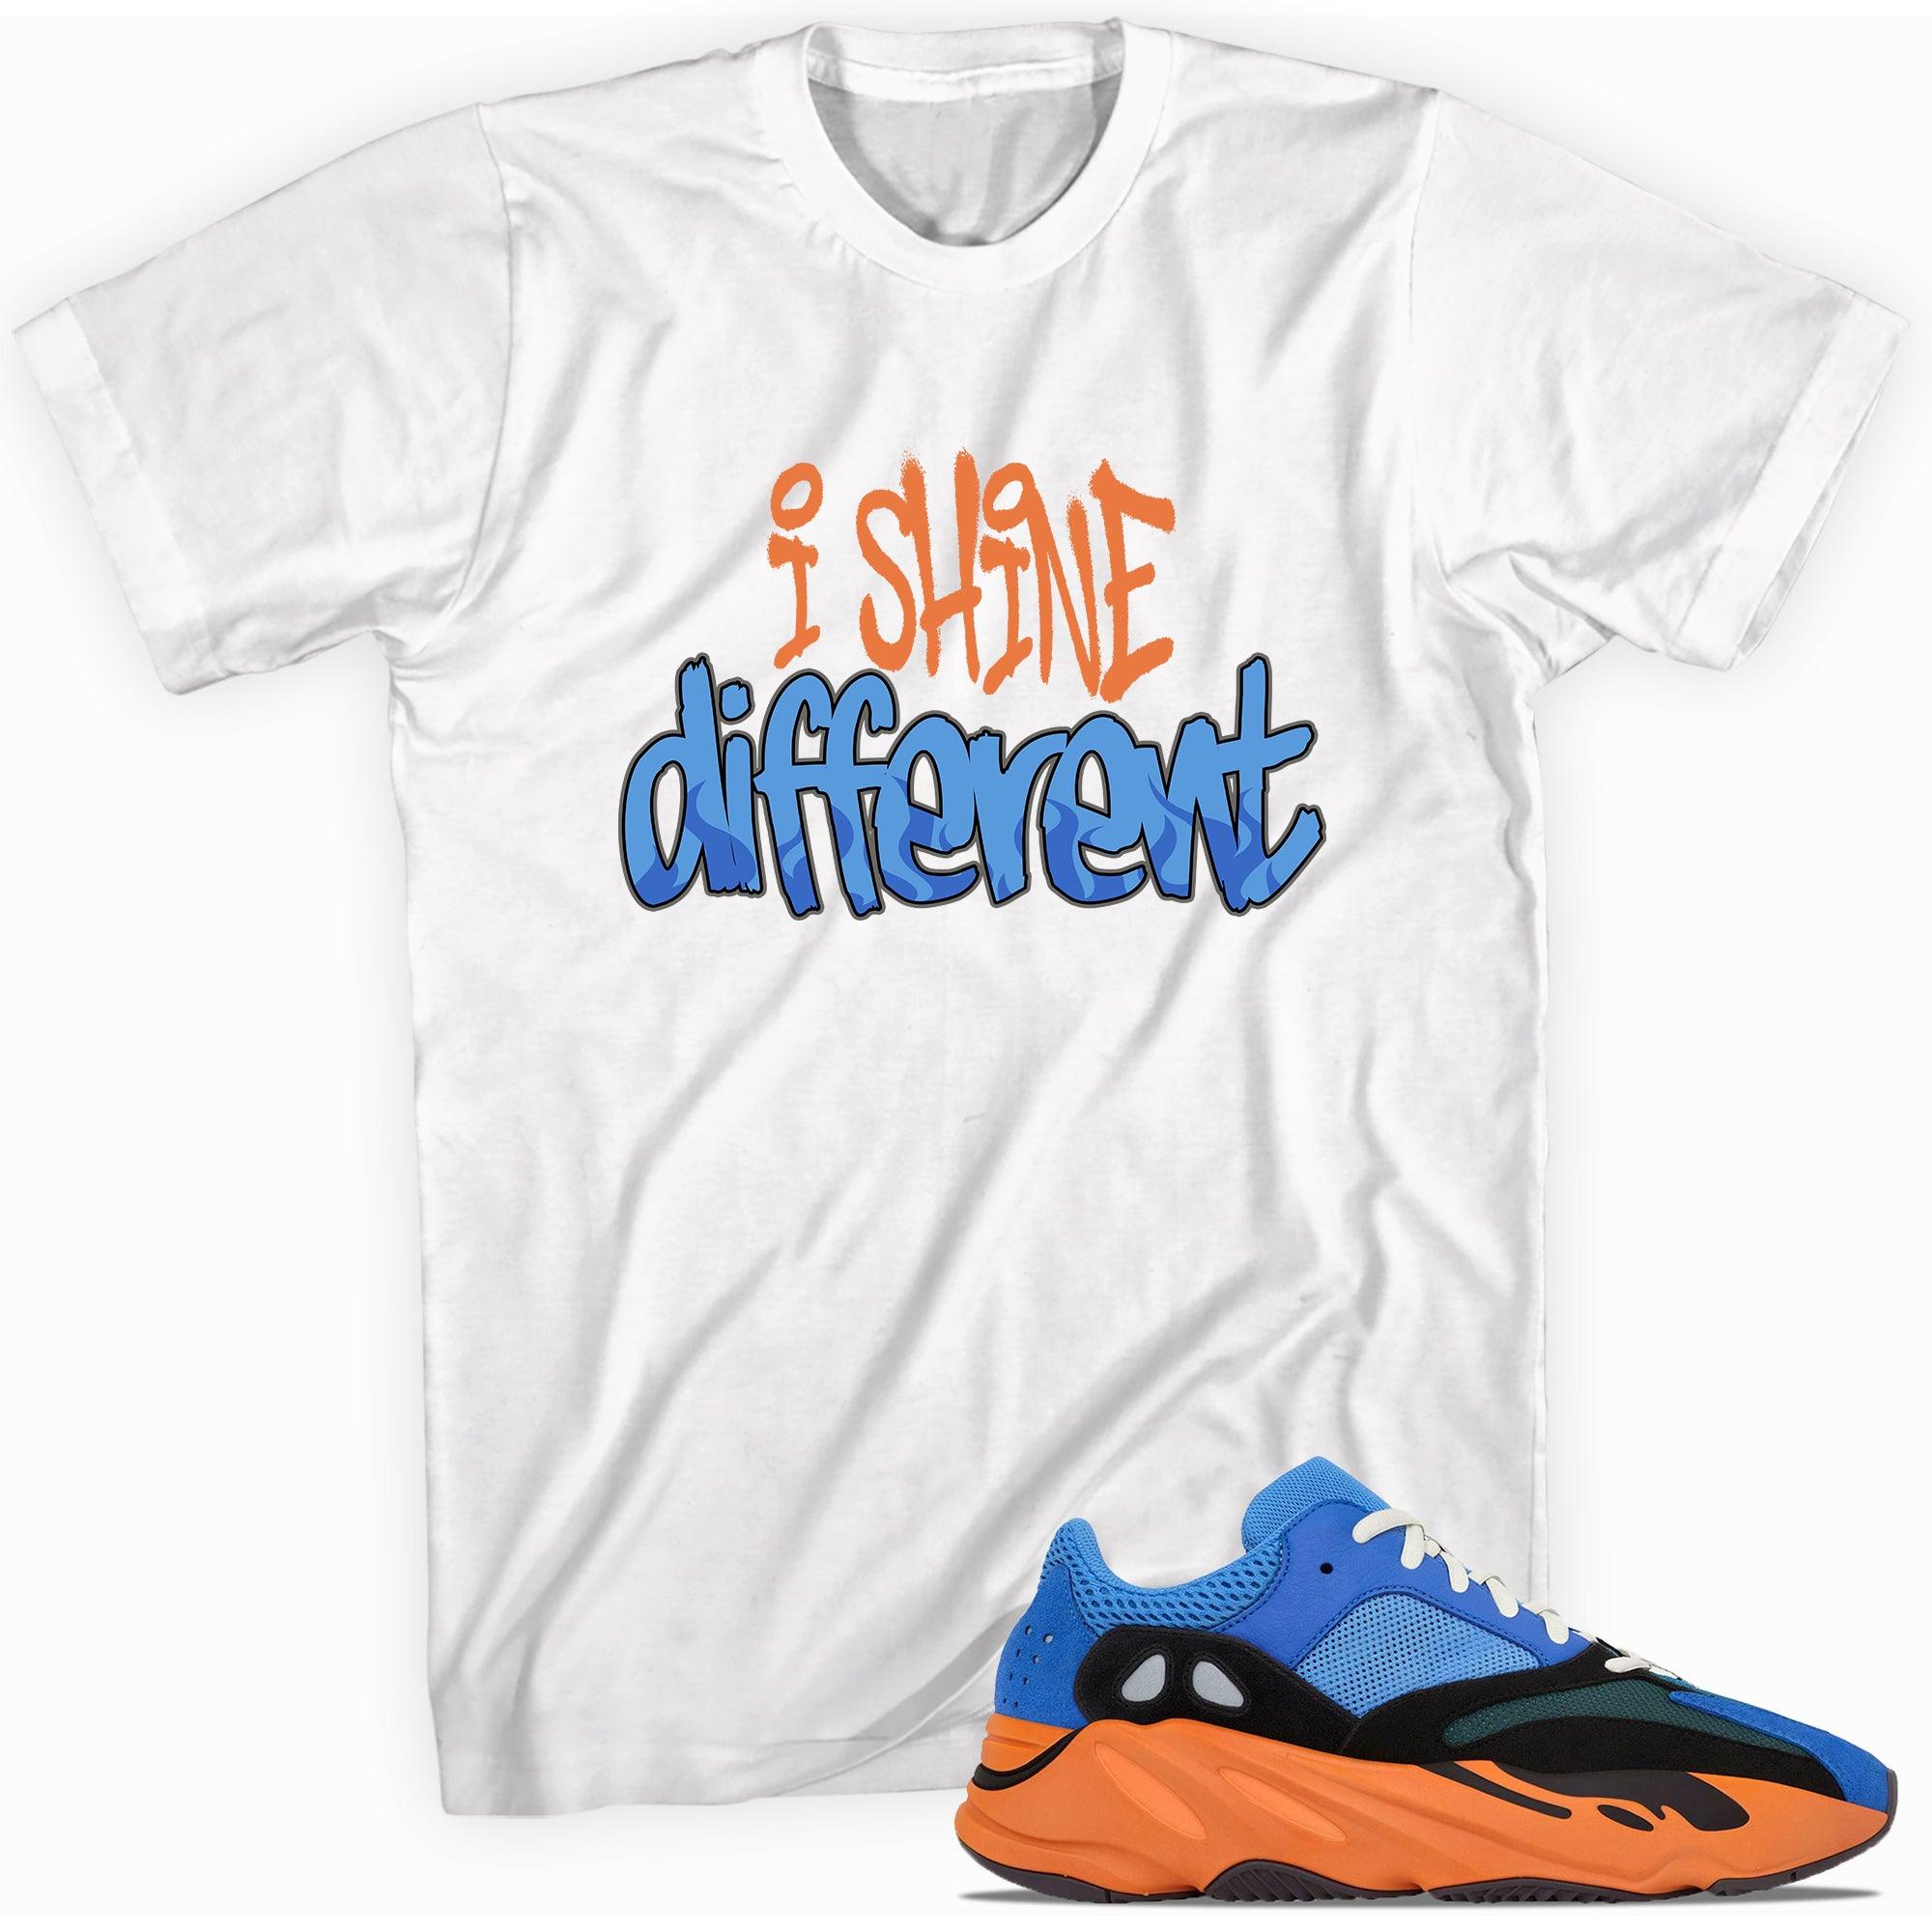 Shine Different Shirt Yeezy Boost 700s Bright Blue photo